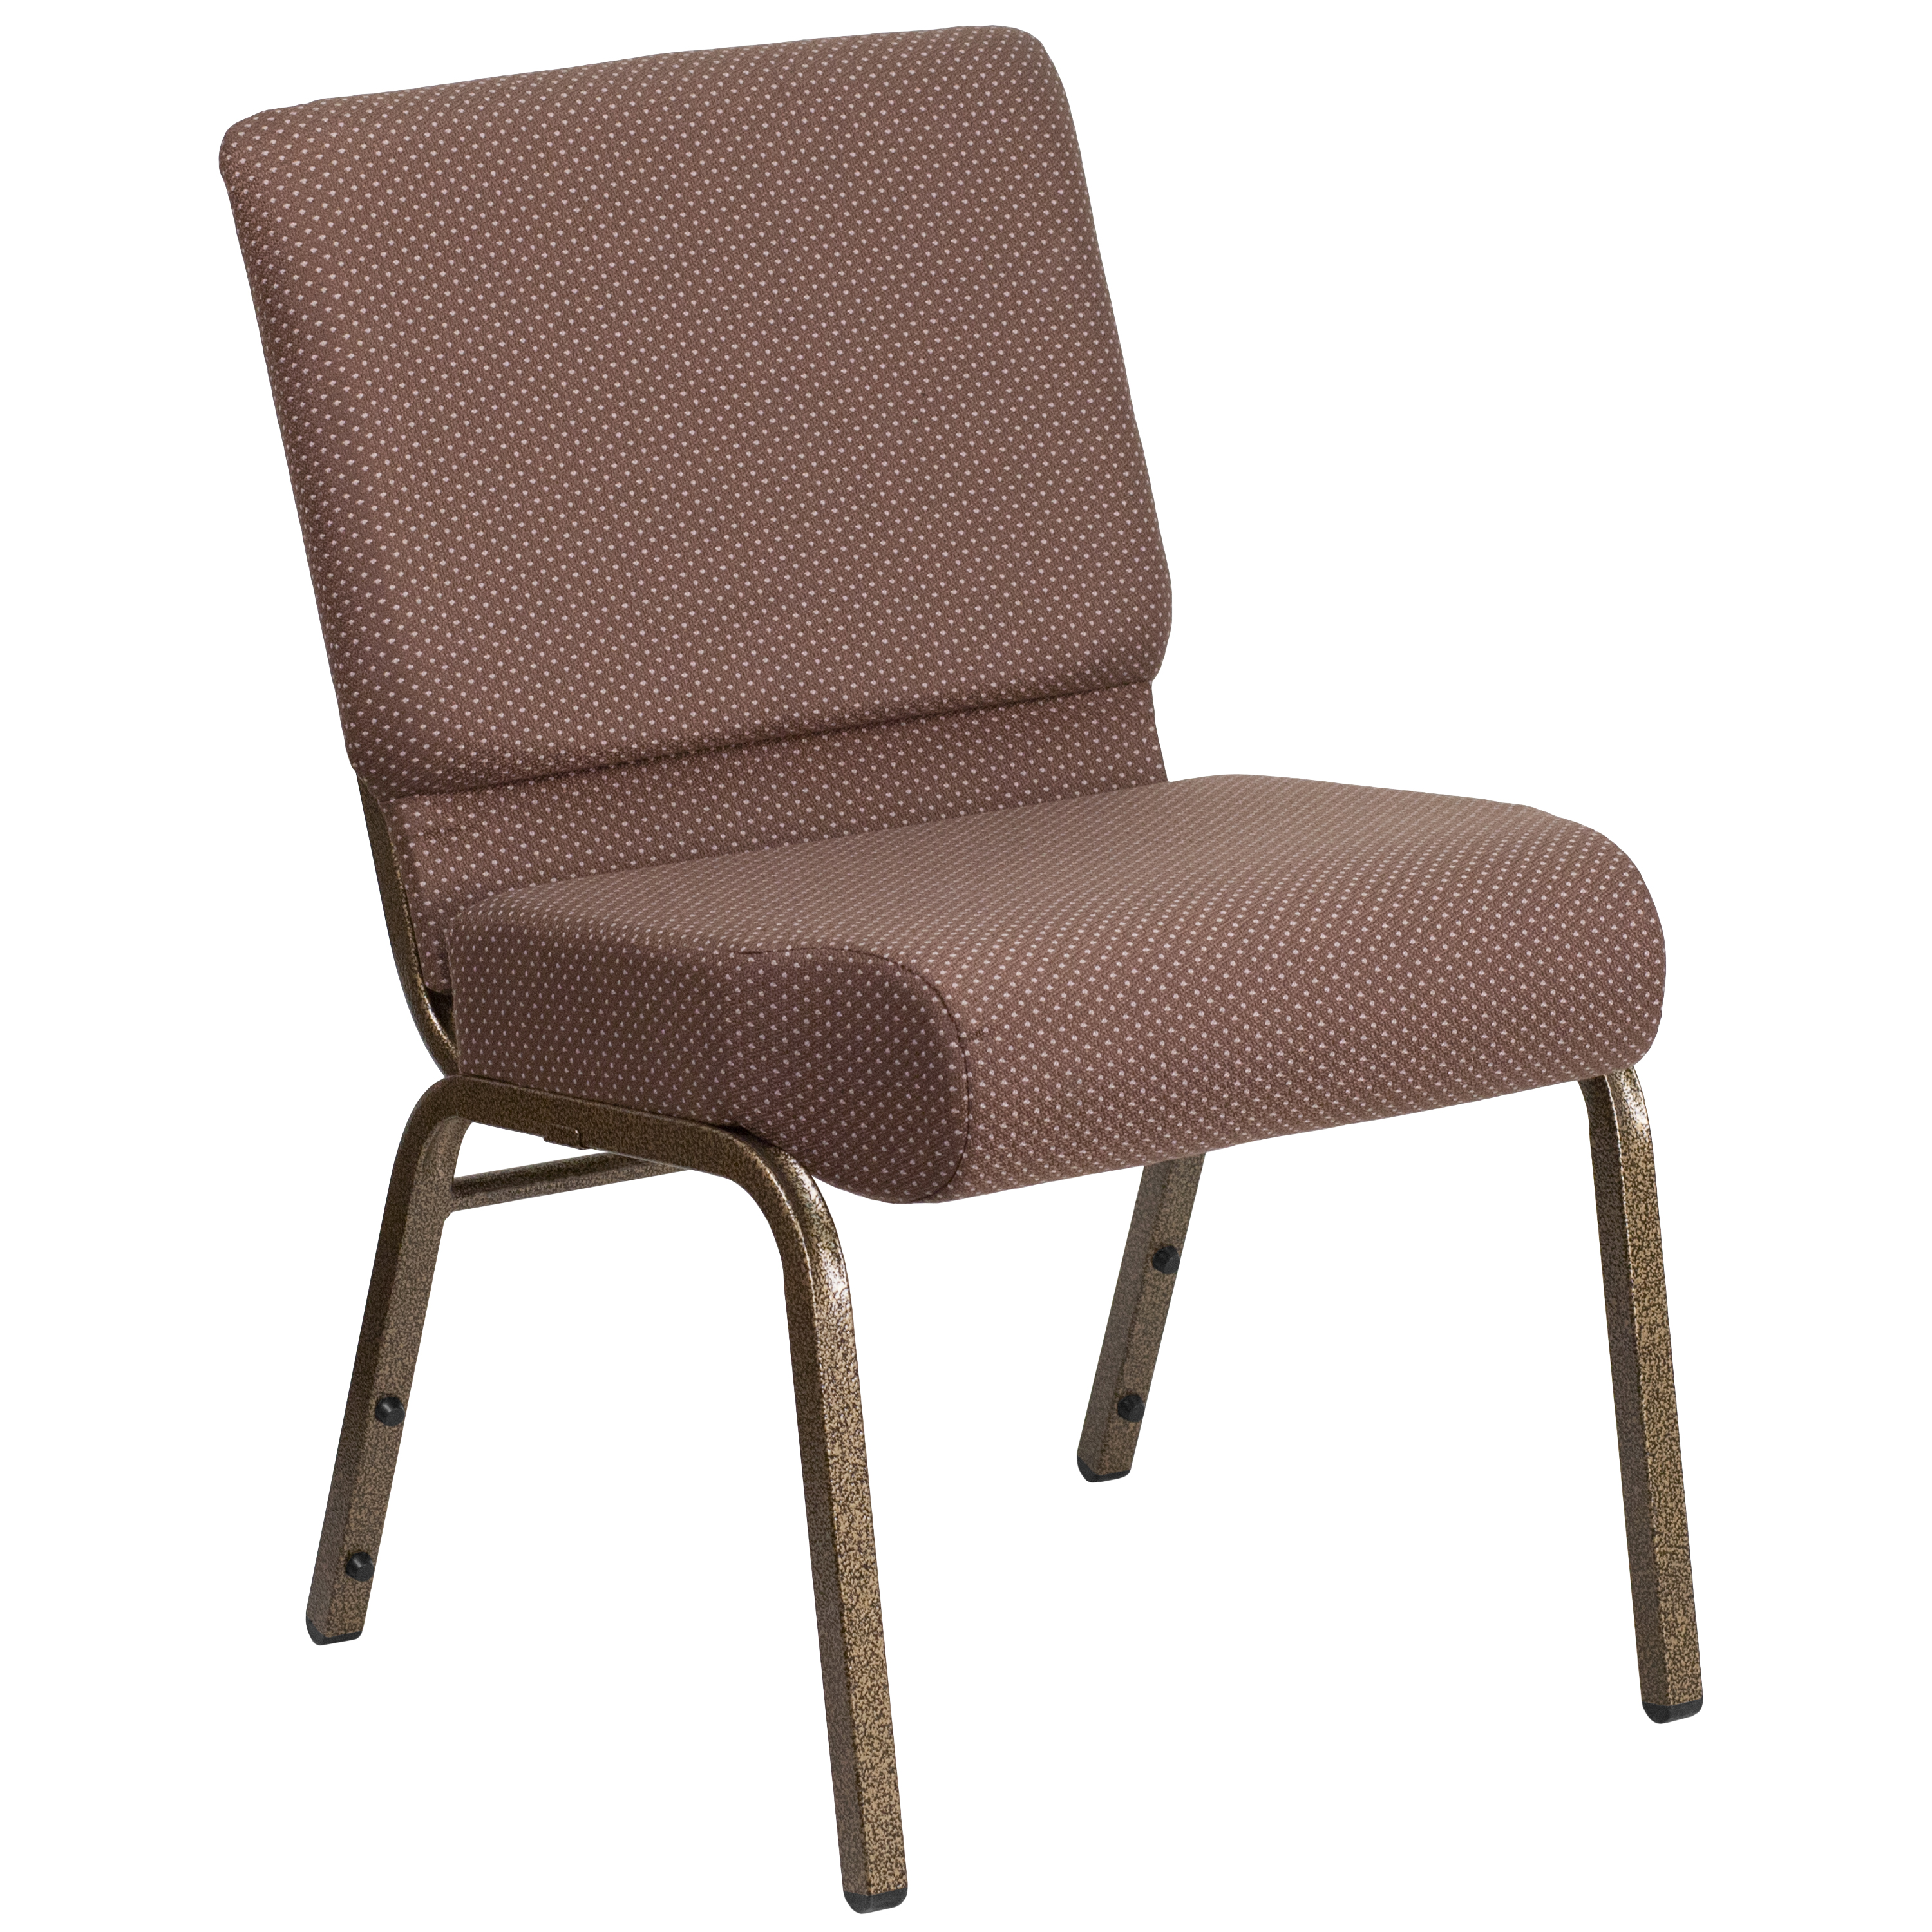 Flash Furniture HERCULES Series 21''W Stacking Church Chair in Brown Dot Fabric - Gold Vein Frame - image 2 of 11